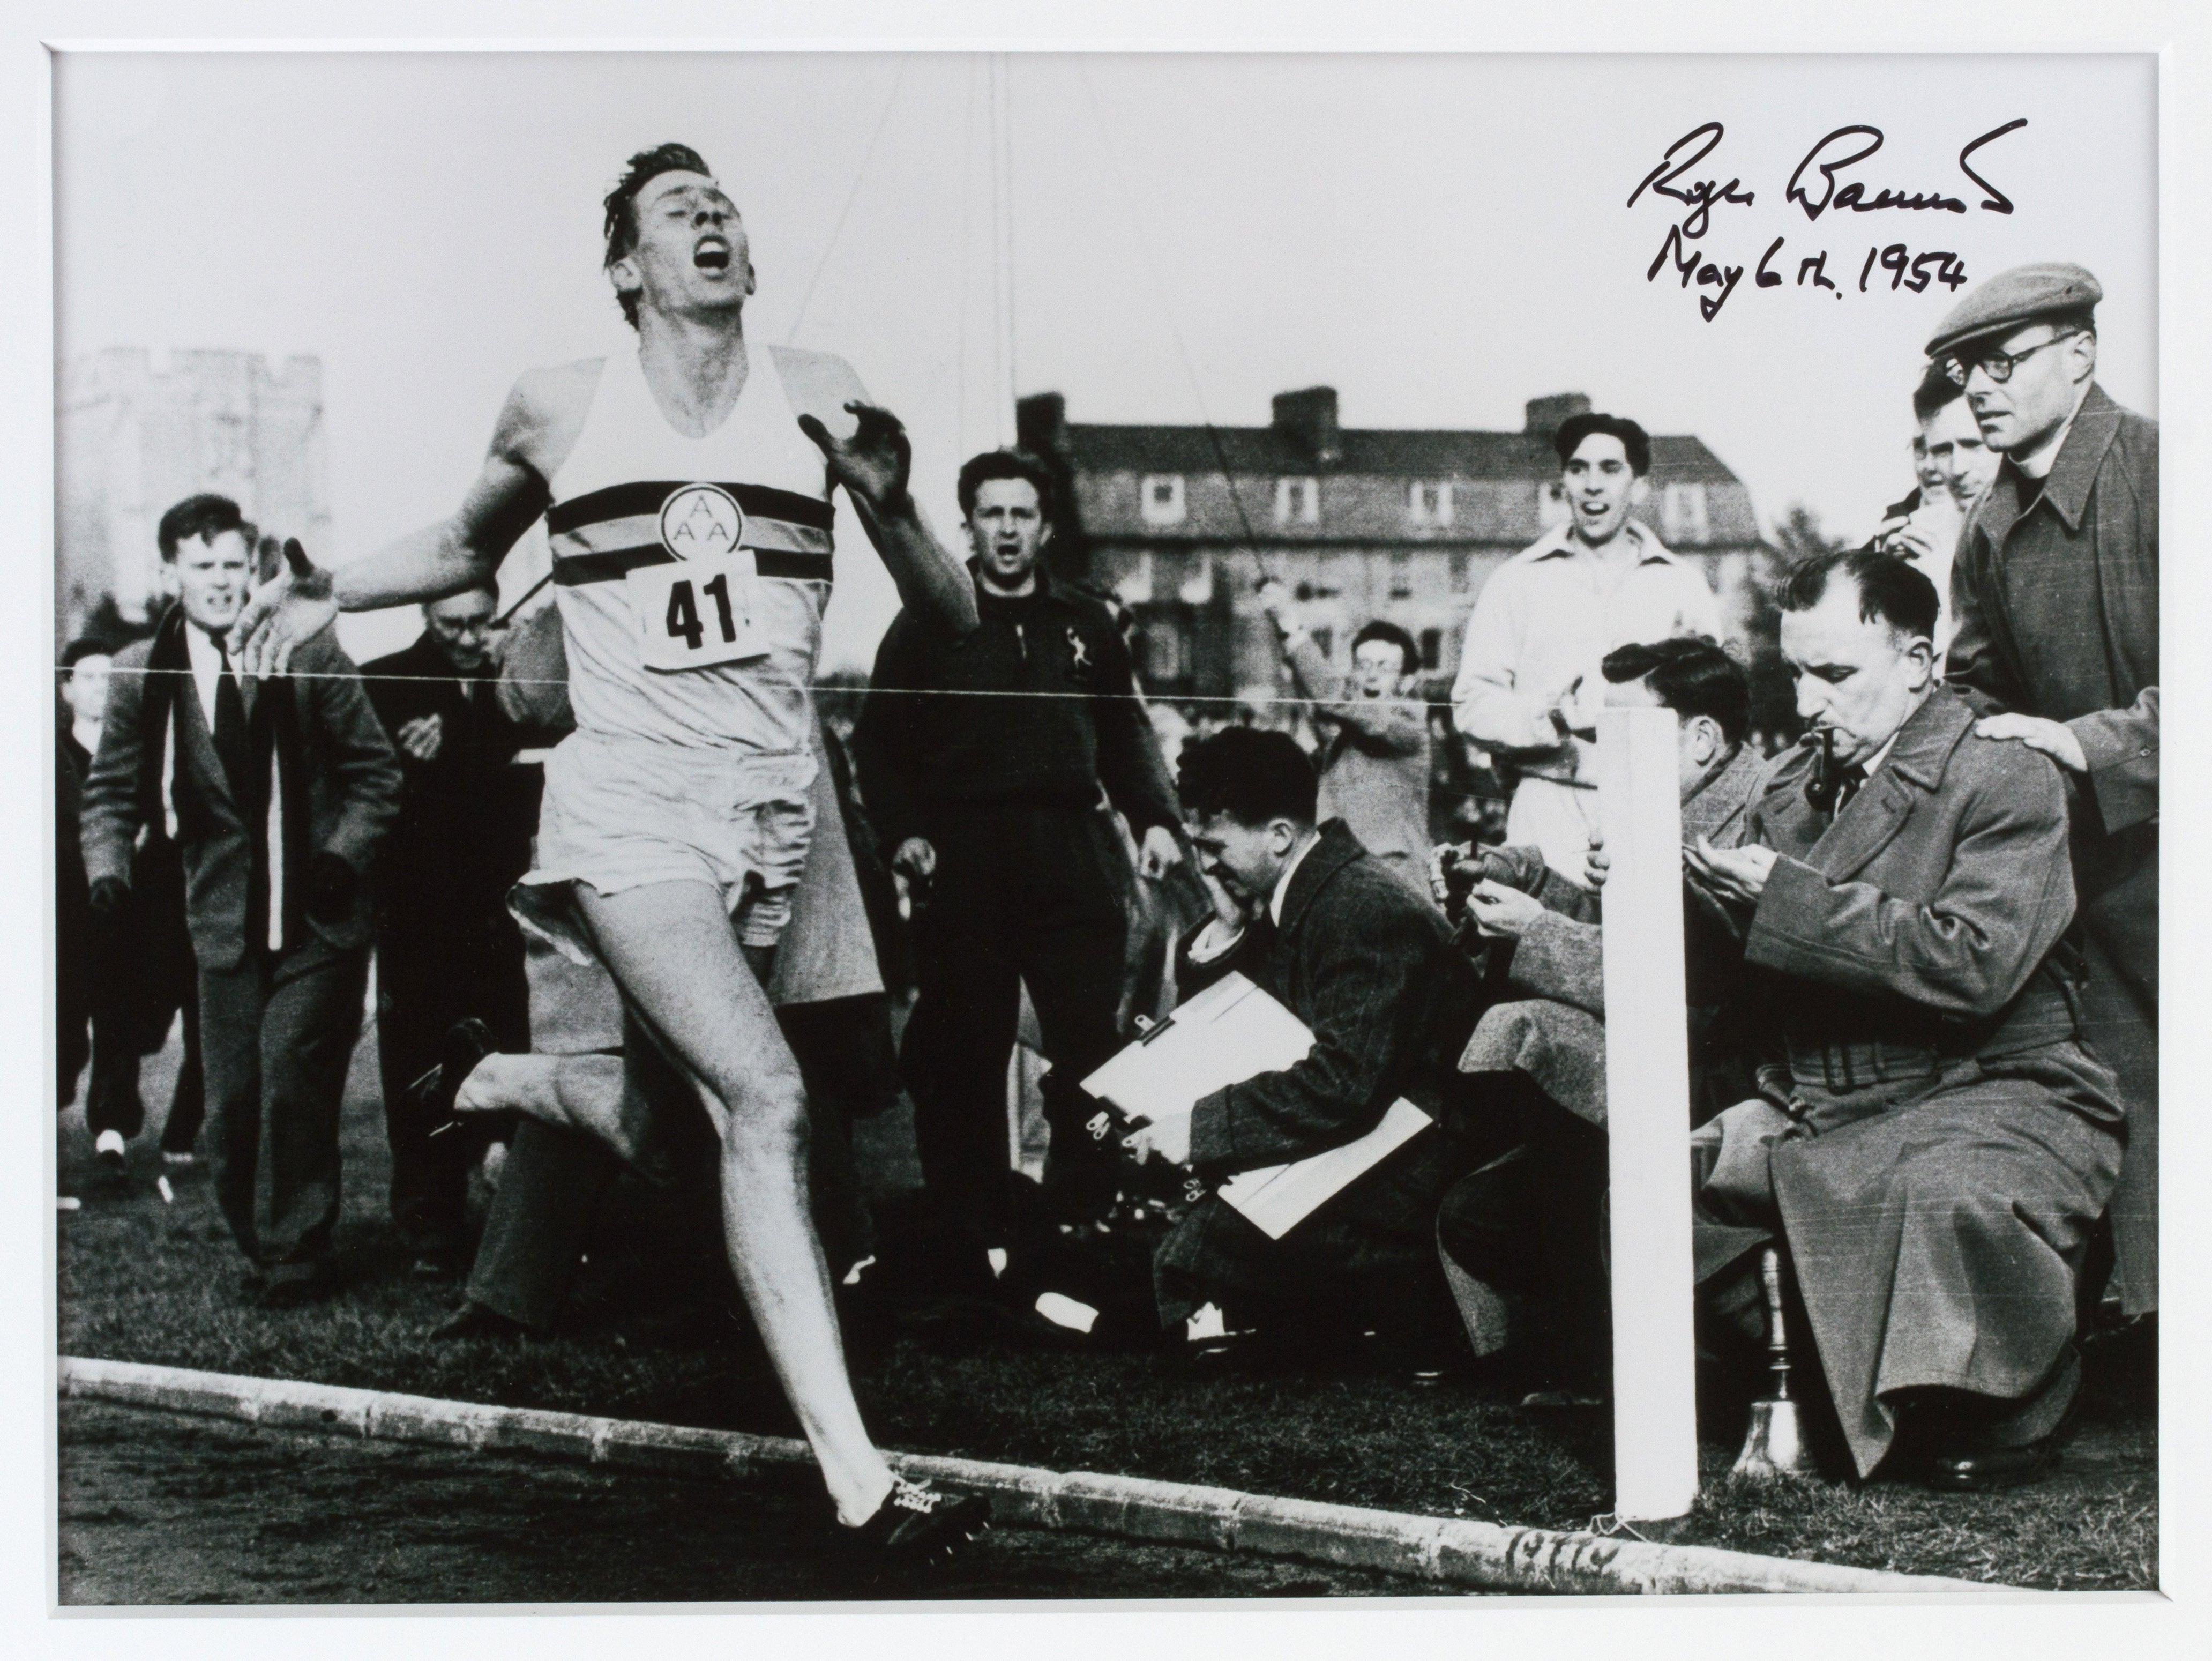 Roger Bannister Signed: “However ordinary each of us may seem...”